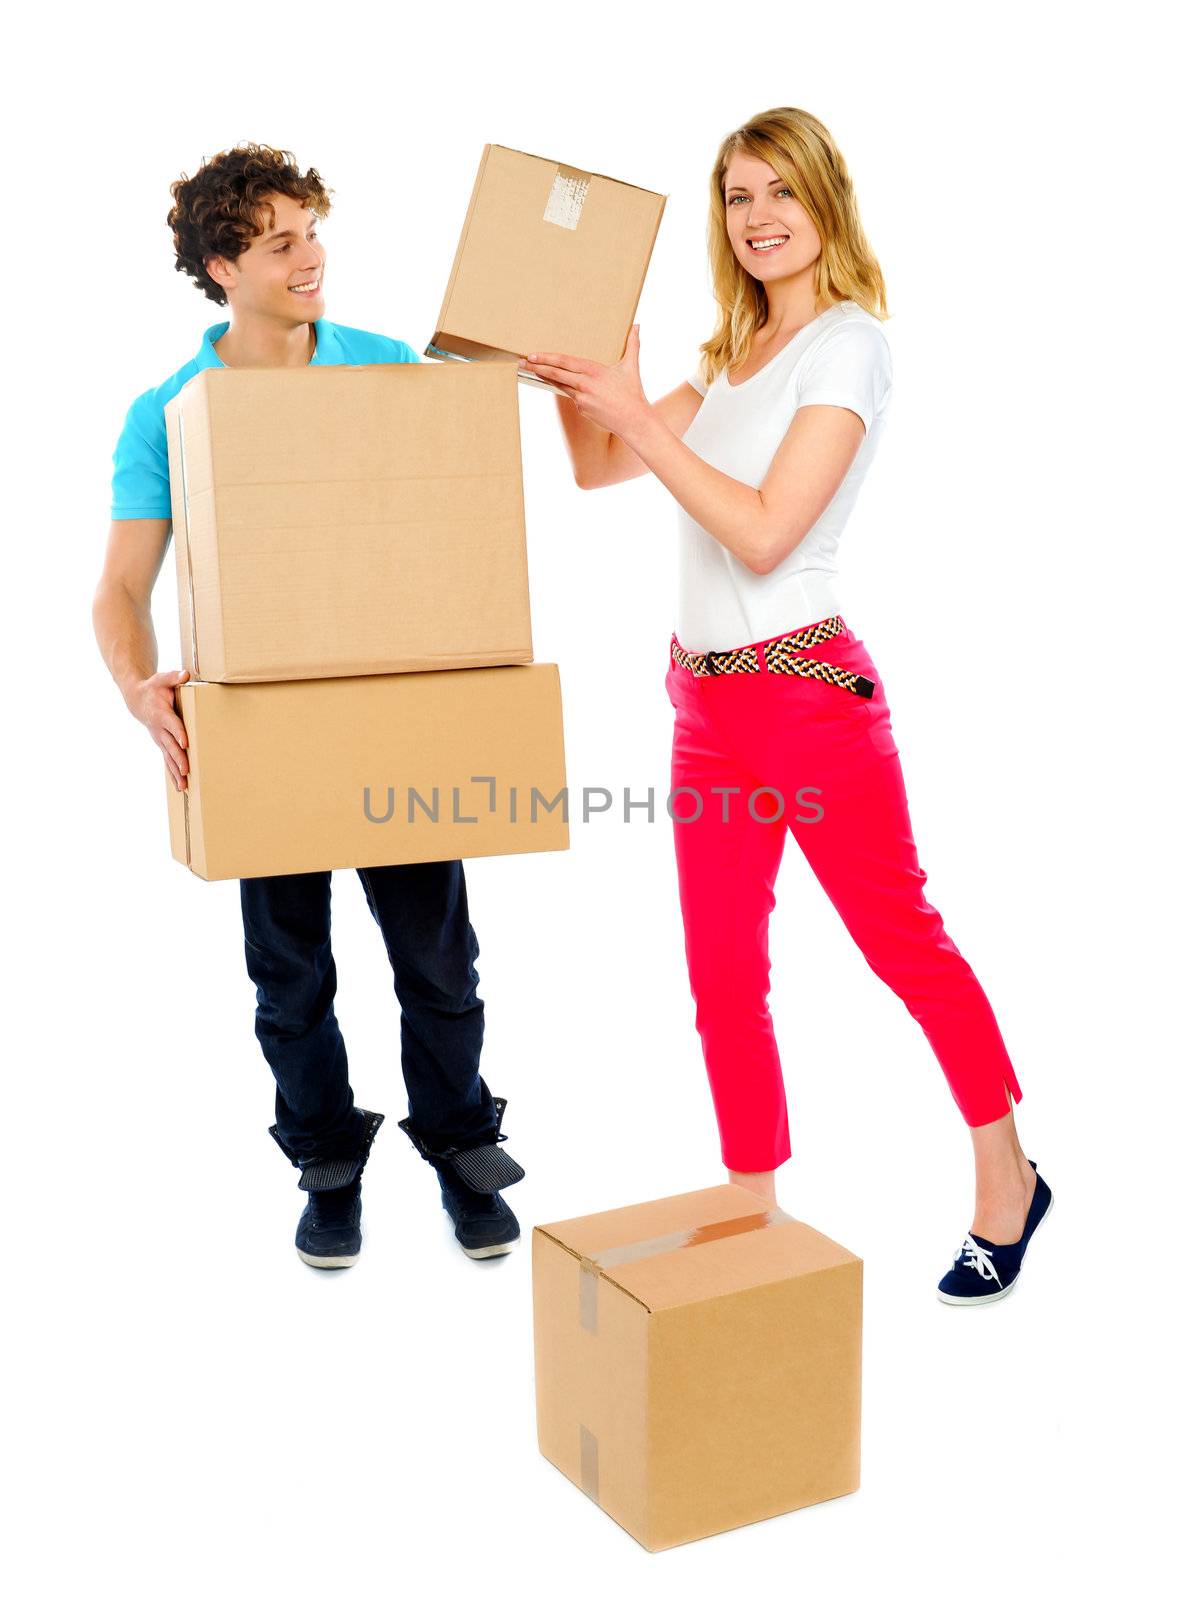 Girl passing cardboard boxes to man while he holds pile of them. All on white background